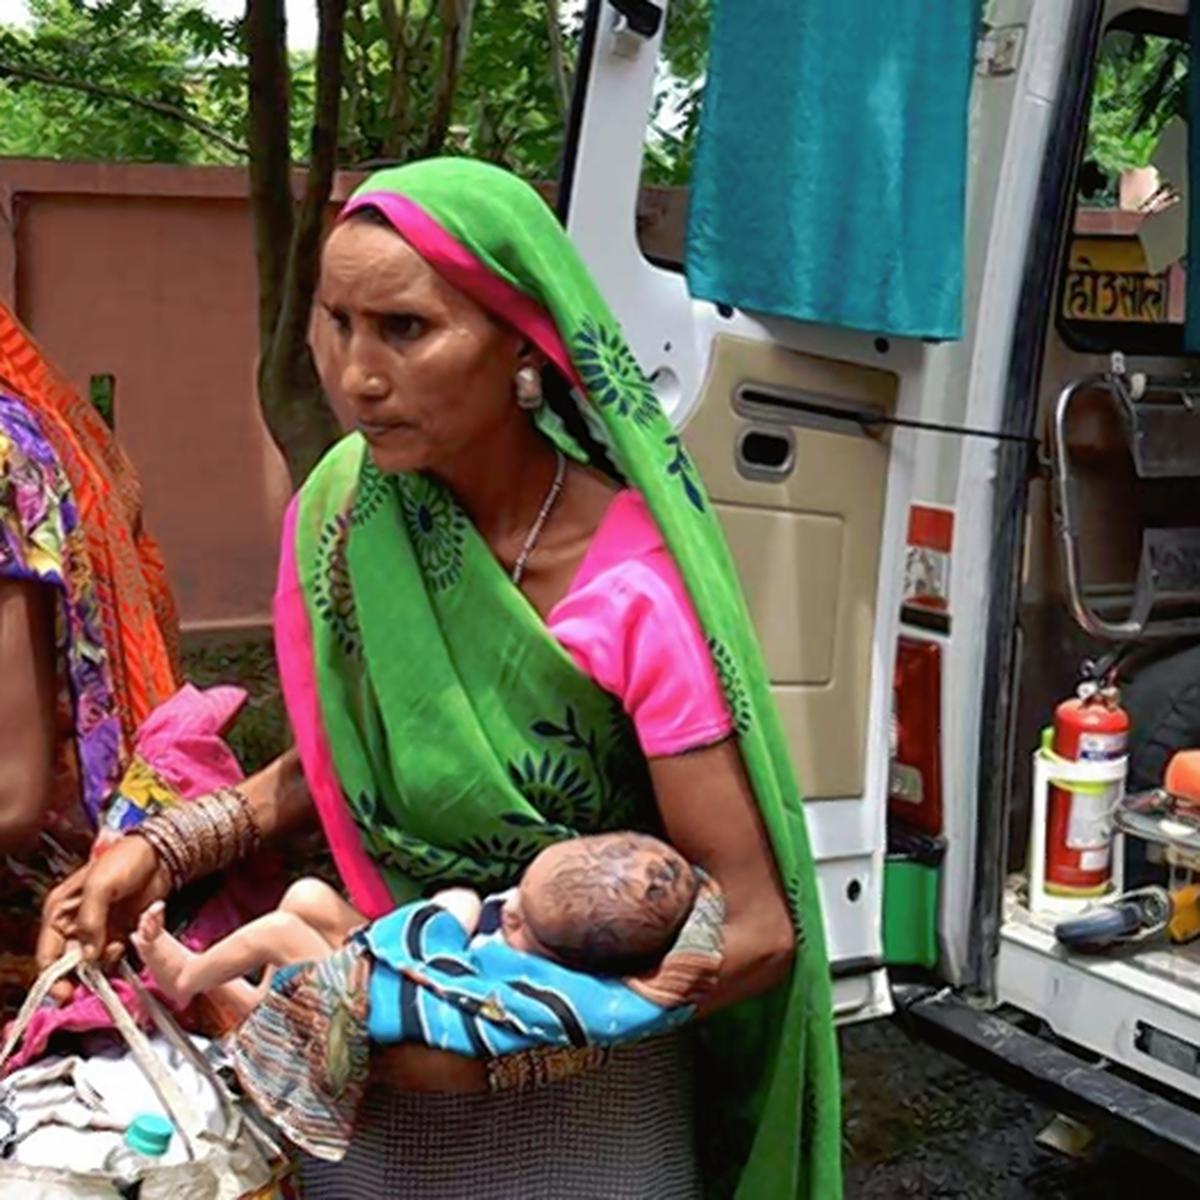 What Women Want” in Childbirth. WRA India's groundbreaking